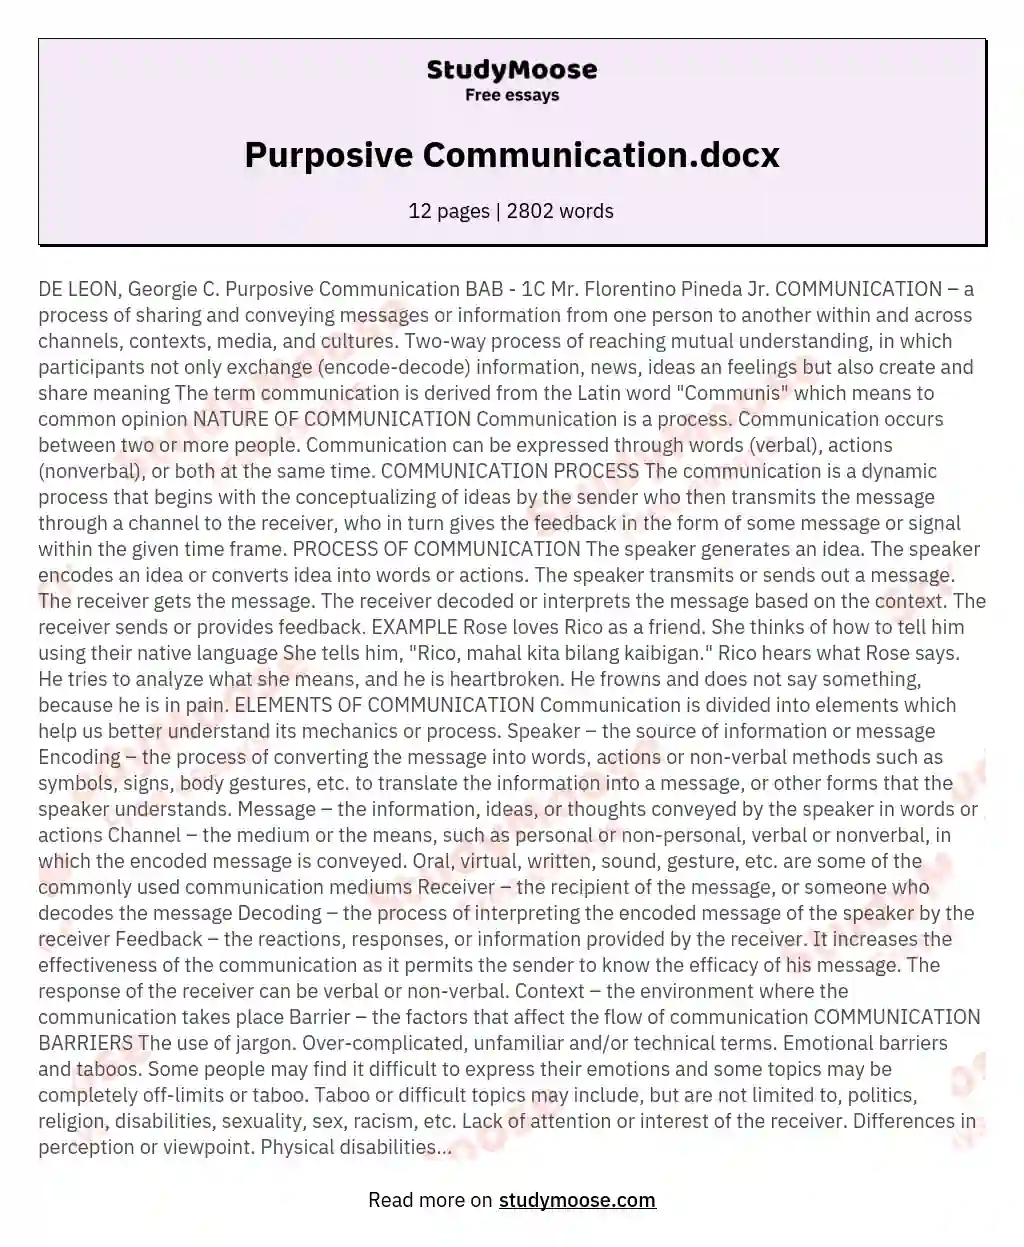 research proposal for purposive communication